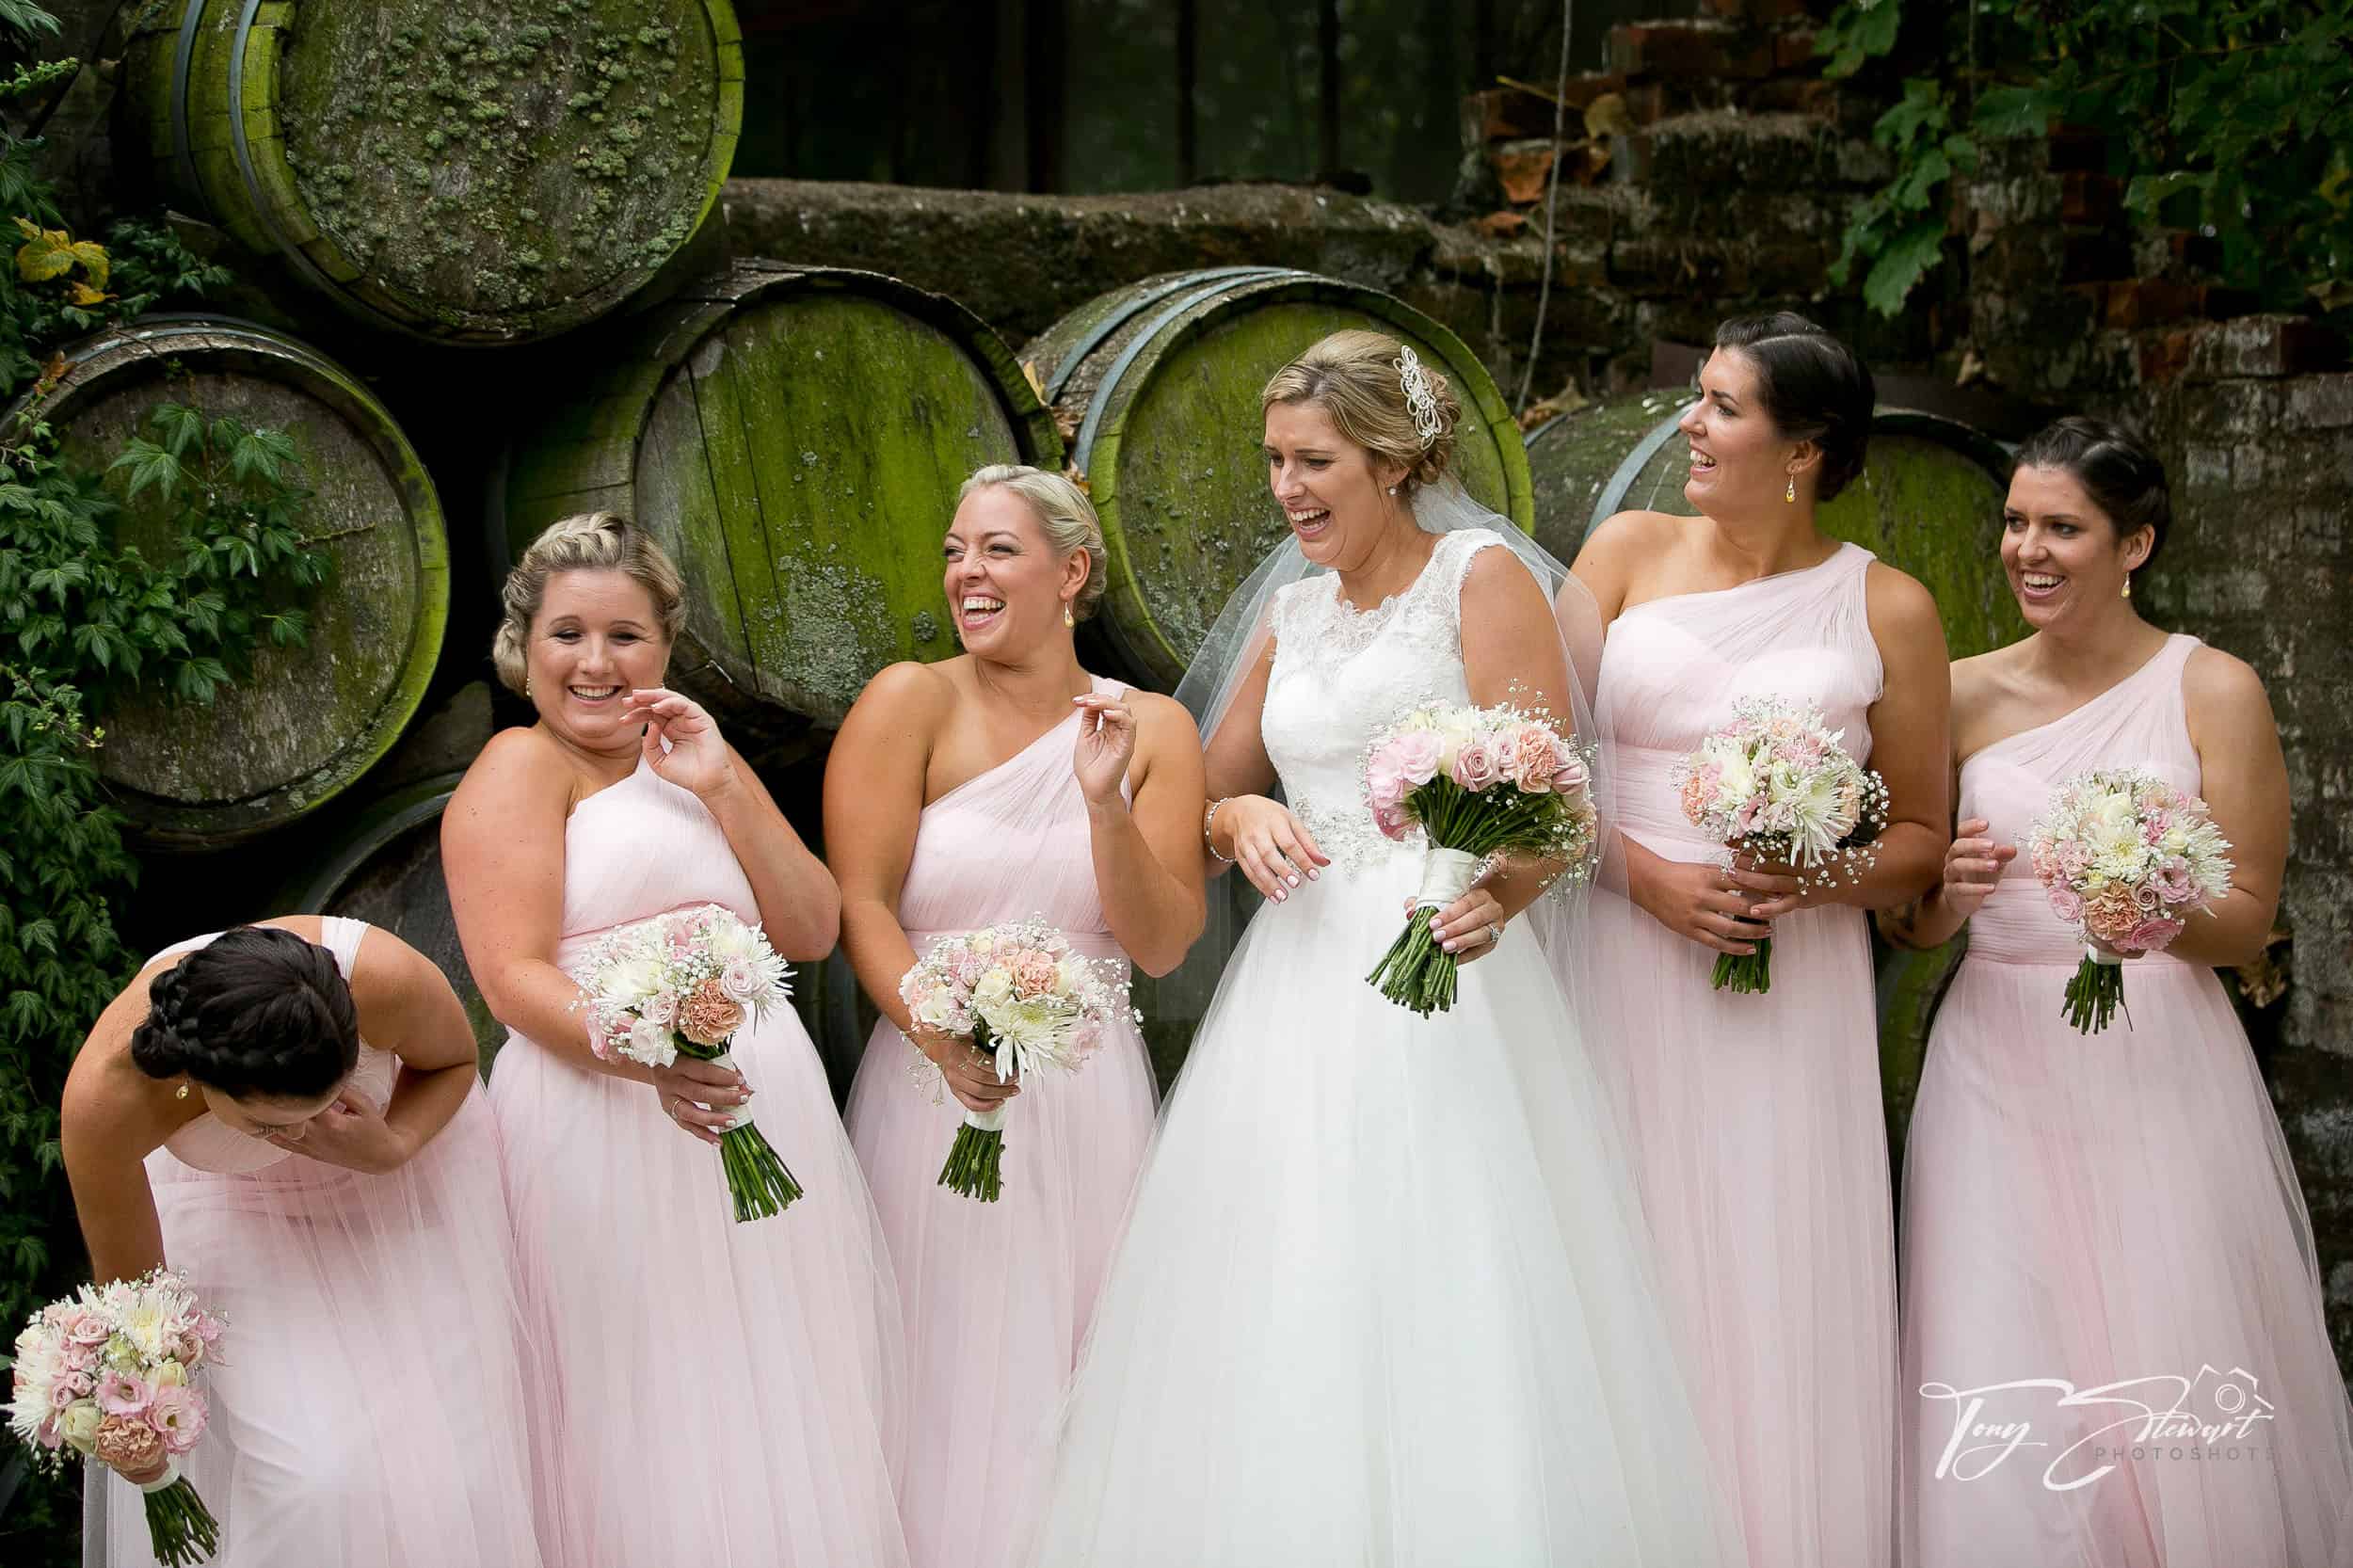 Six girls in a bridal party share a laugh together by wine barrels at Trents Estate.